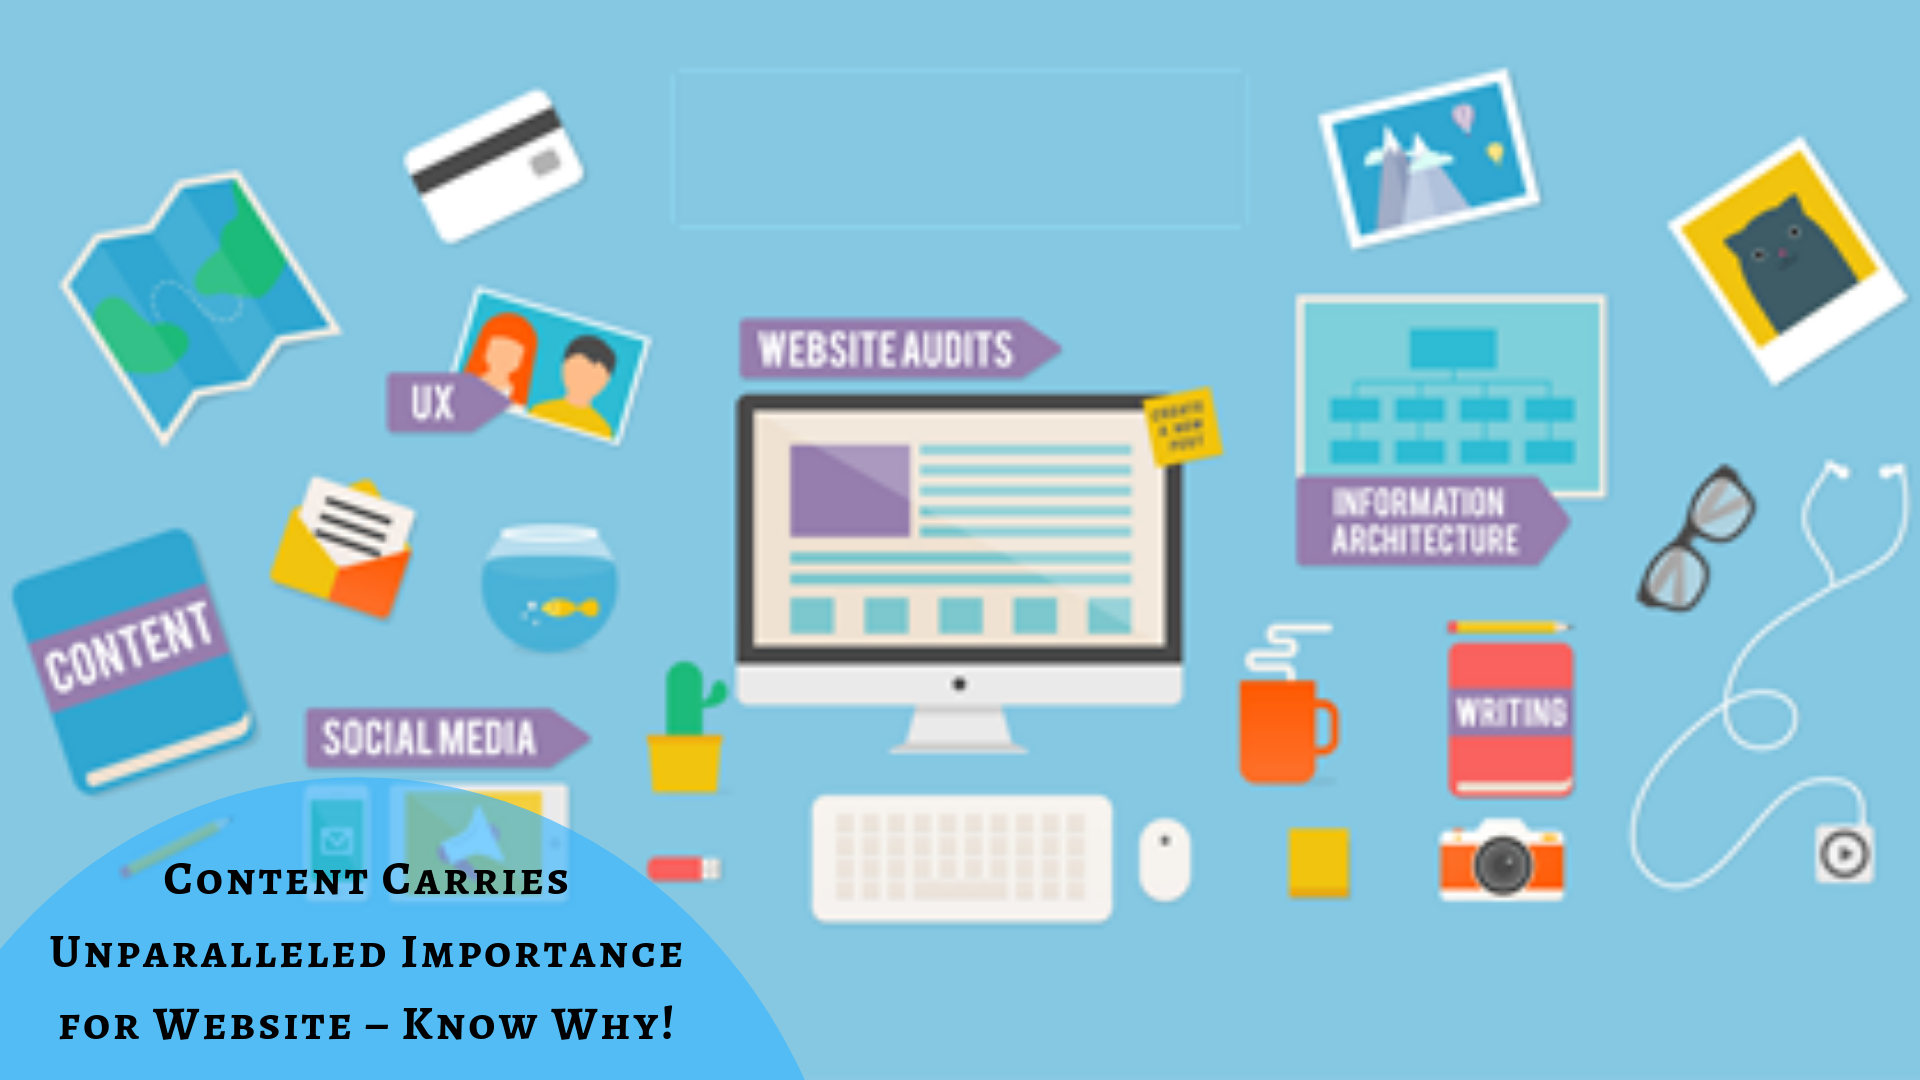 Content Carries Unparalleled Importance for Website – Know Why!